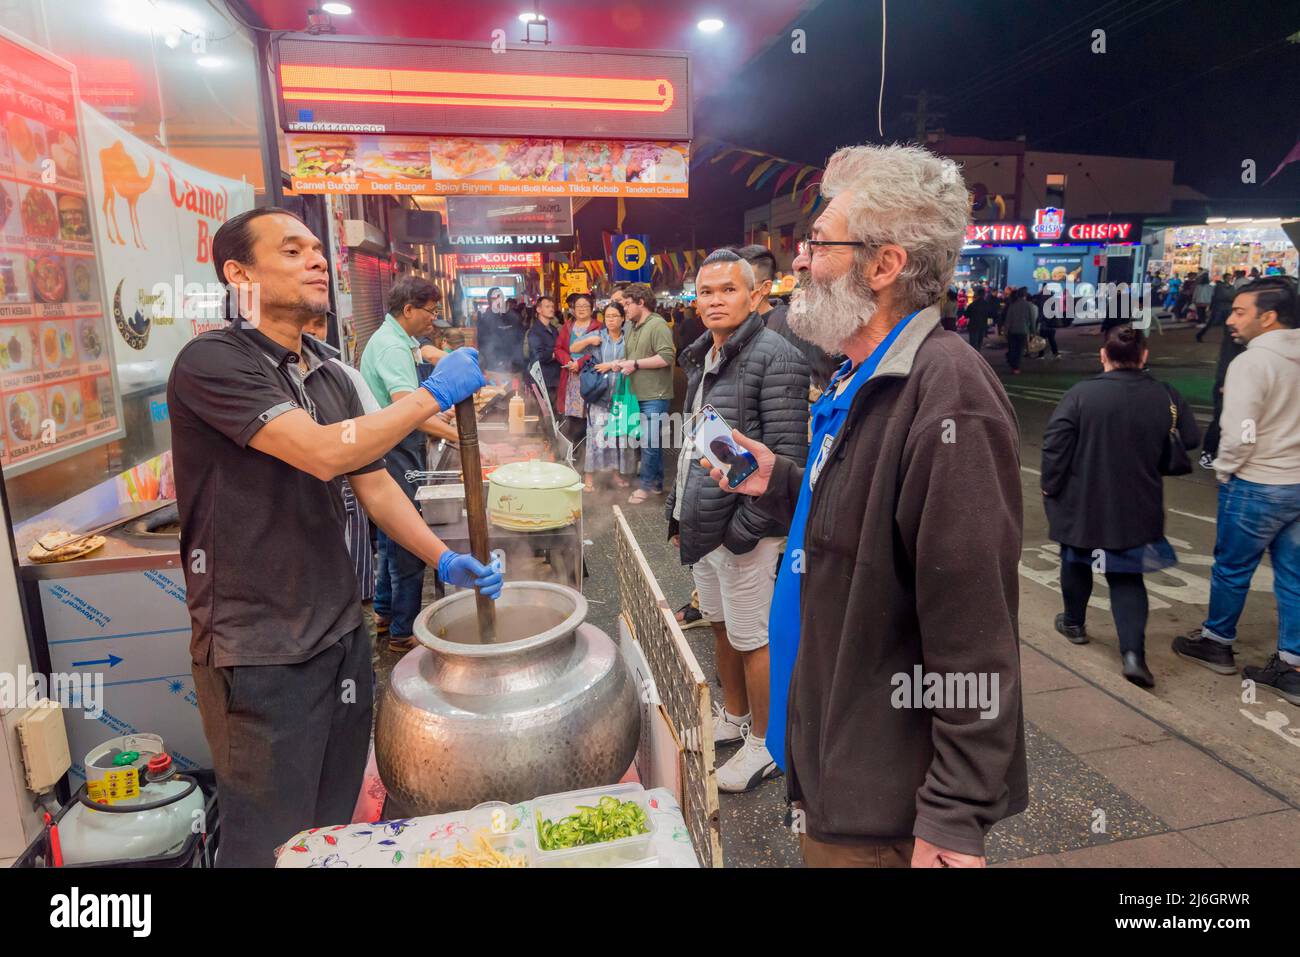 April 30, Lakemba, Sydney, Australia: On the final night of Ramadan in Sydney, the Ramadan Nights Festival is in full swing from sunset at 17.30 through to 02.00 the next morning. Here two men chat while one stirs a large pot of dal style food, possibly Dal Makhani, with a large wooden paddle. Stock Photo